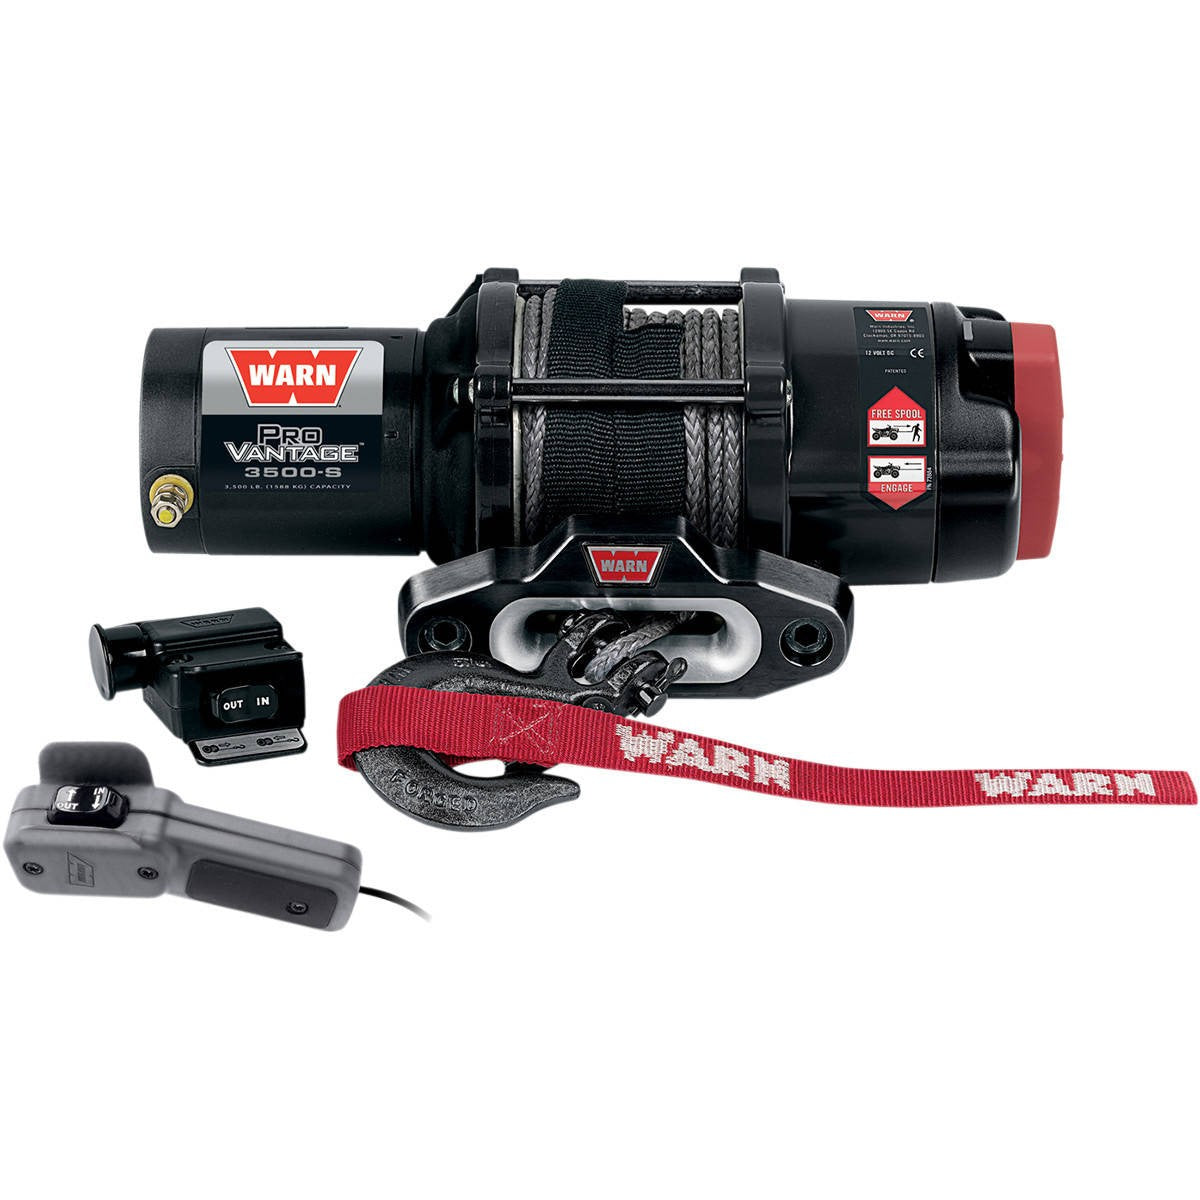 Warn Provantage 3500-lb Winch with Synthetic Rope - PeakBoys